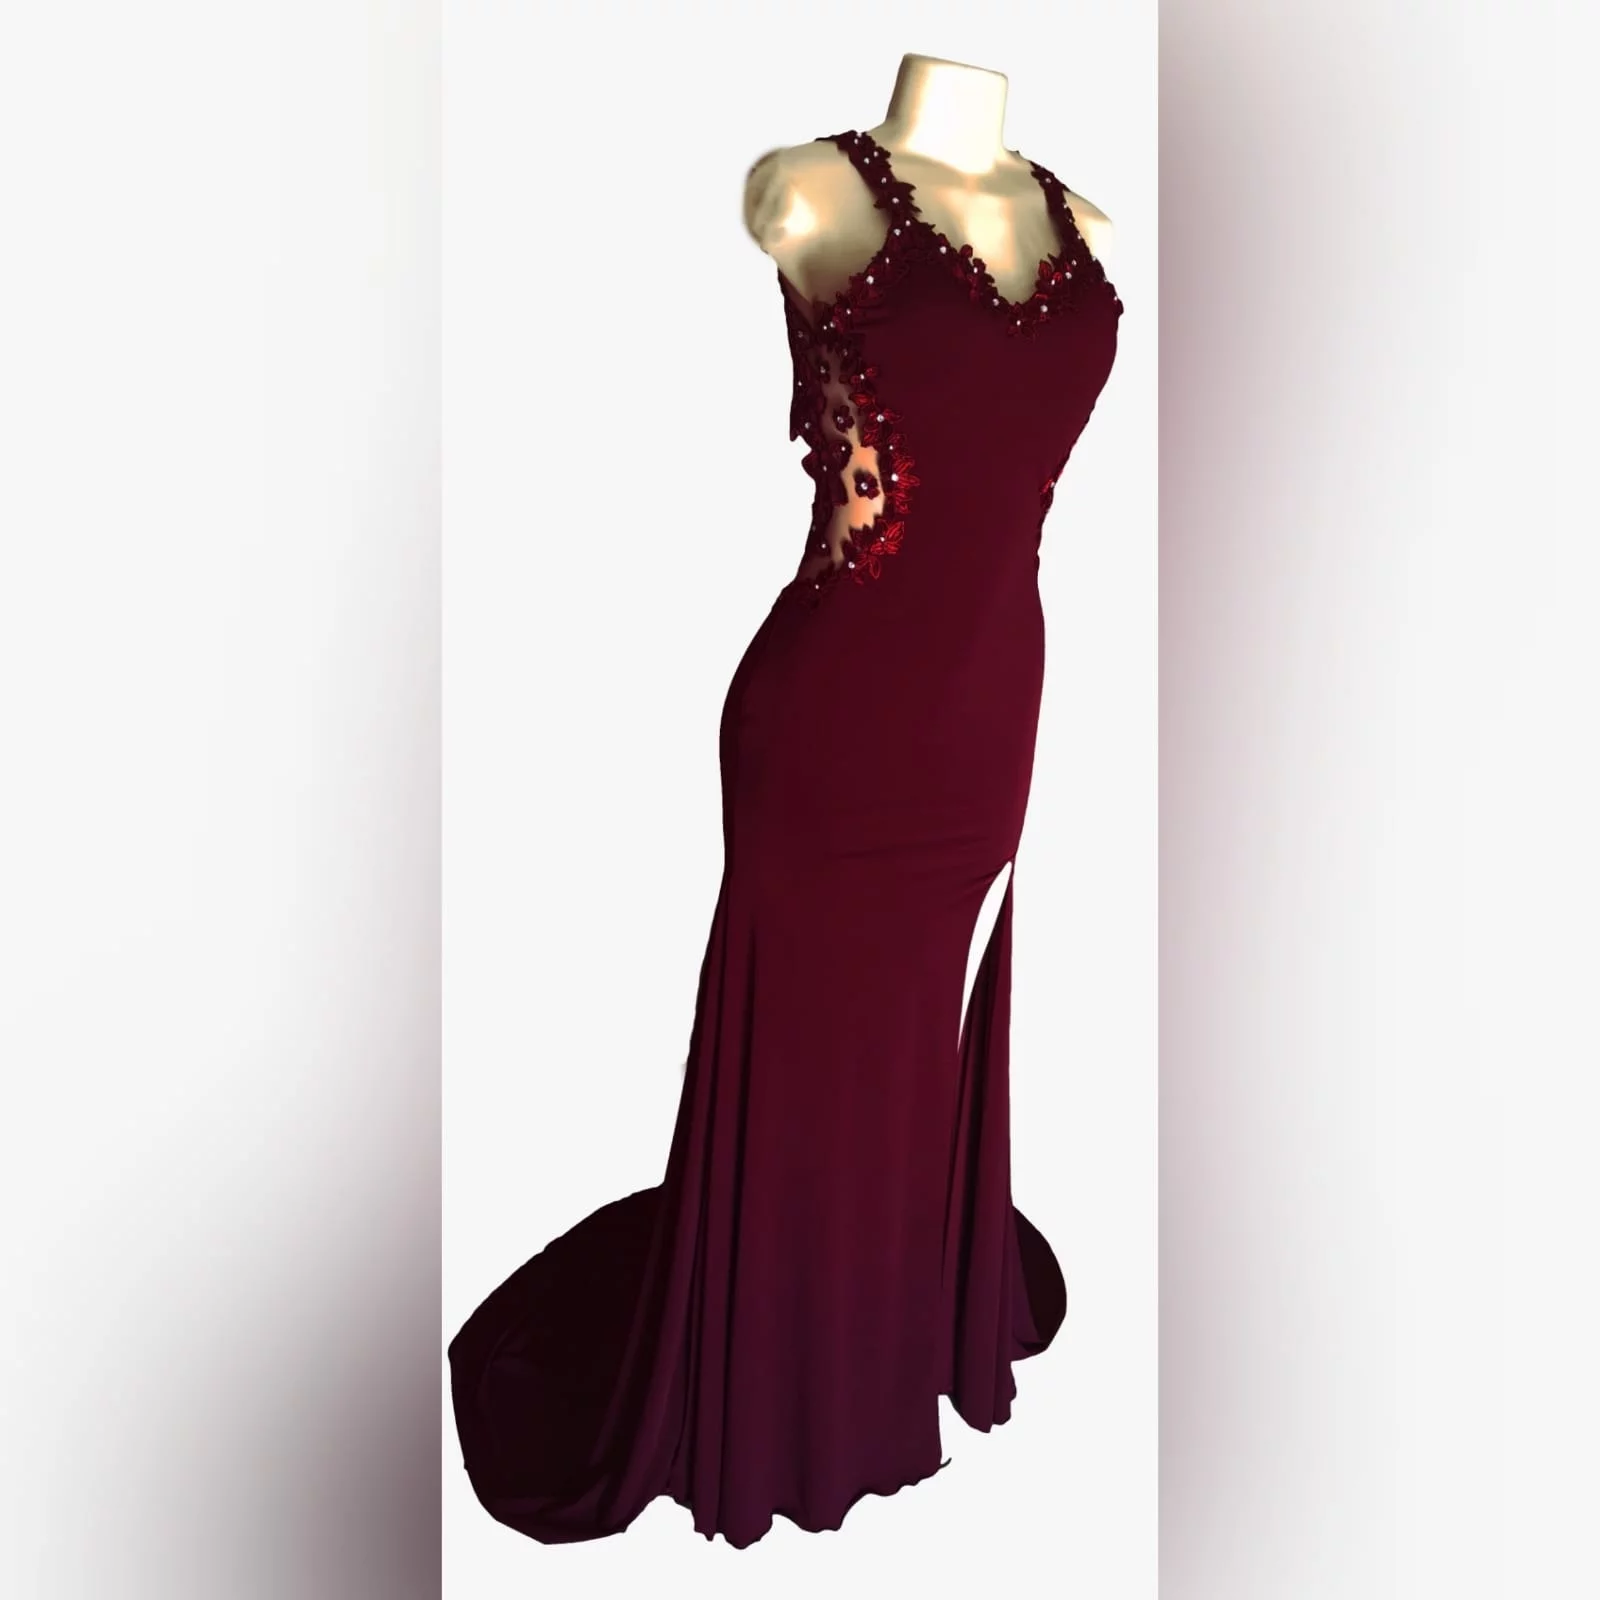 Burgundy long sexy prom dress 9 burgundy long sexy prom dress with an illusion lace low back and side tummy. Sweetheart neckline detailed with lace. With a slit and a train.